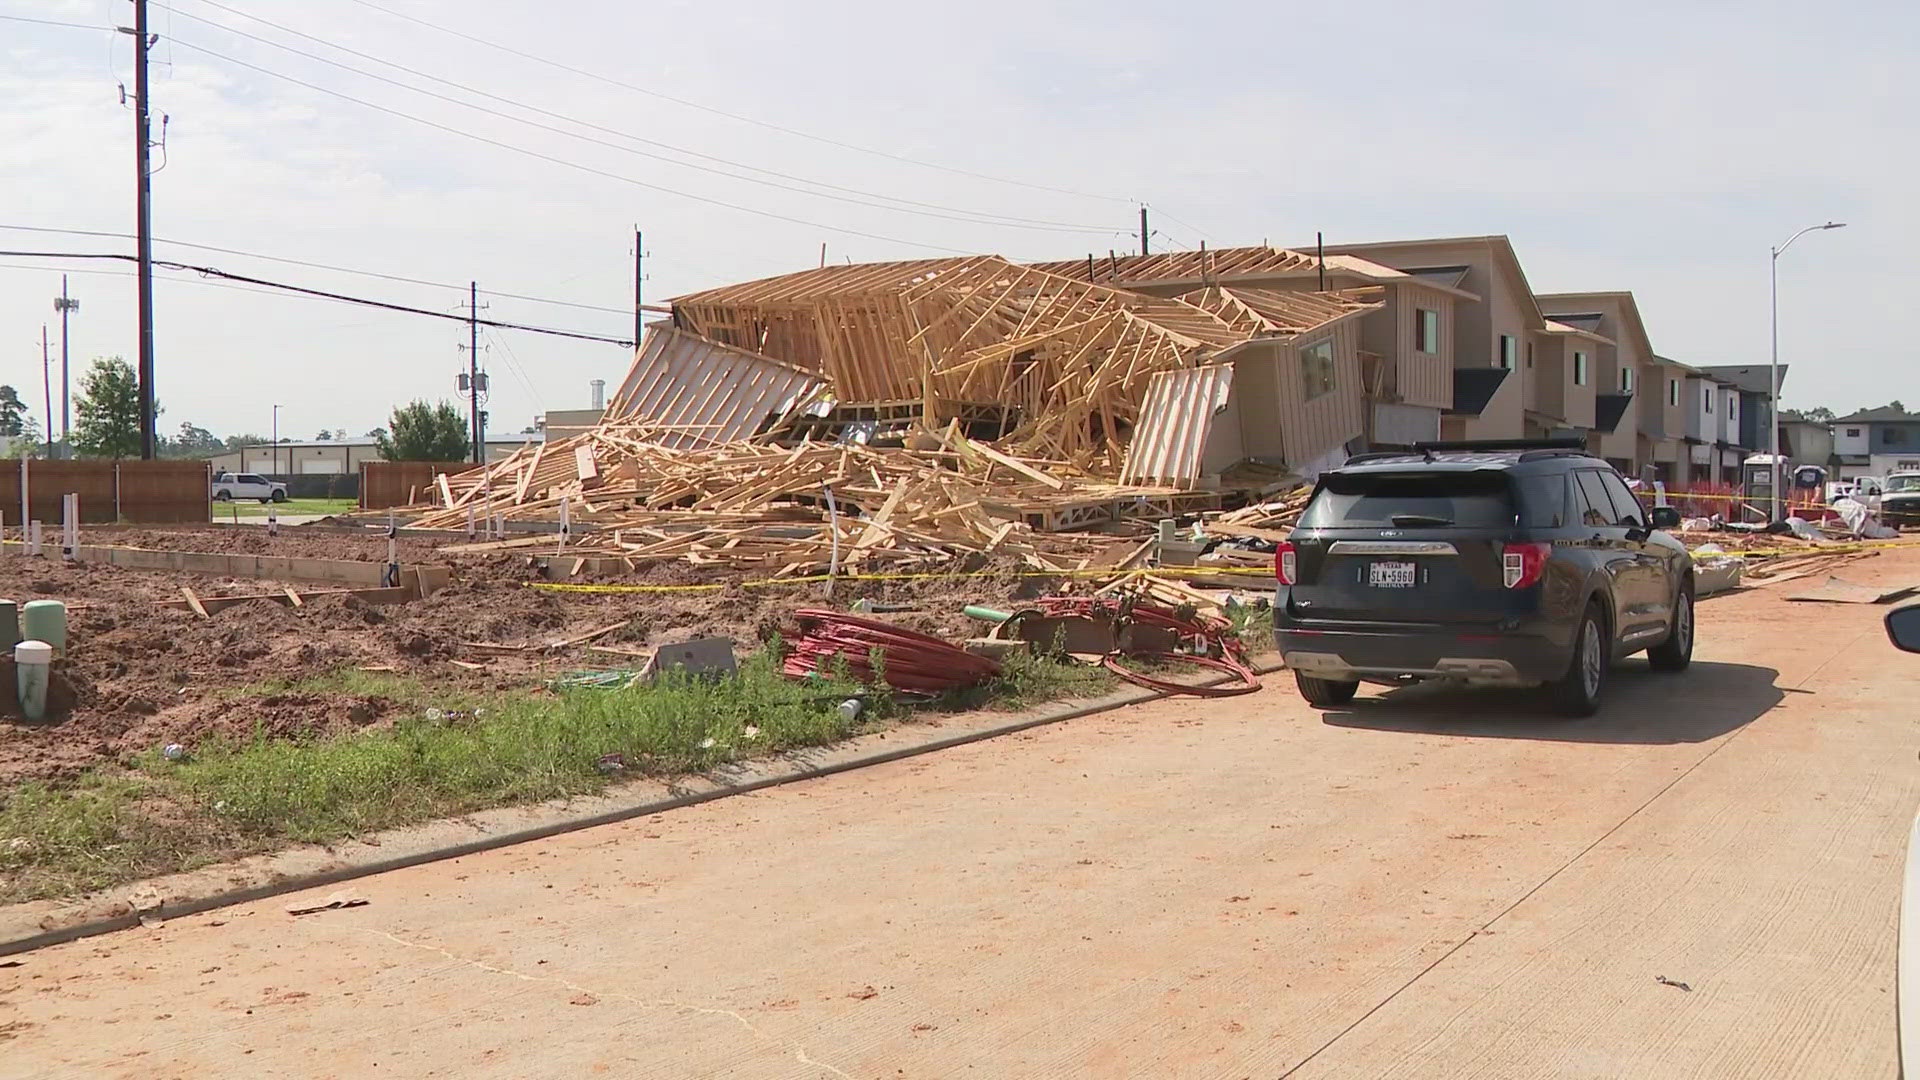 The construction crew told us their co-worker was trapped under the rubble on Willow Heights Lane when a powerful storm blew through the area Tuesday.